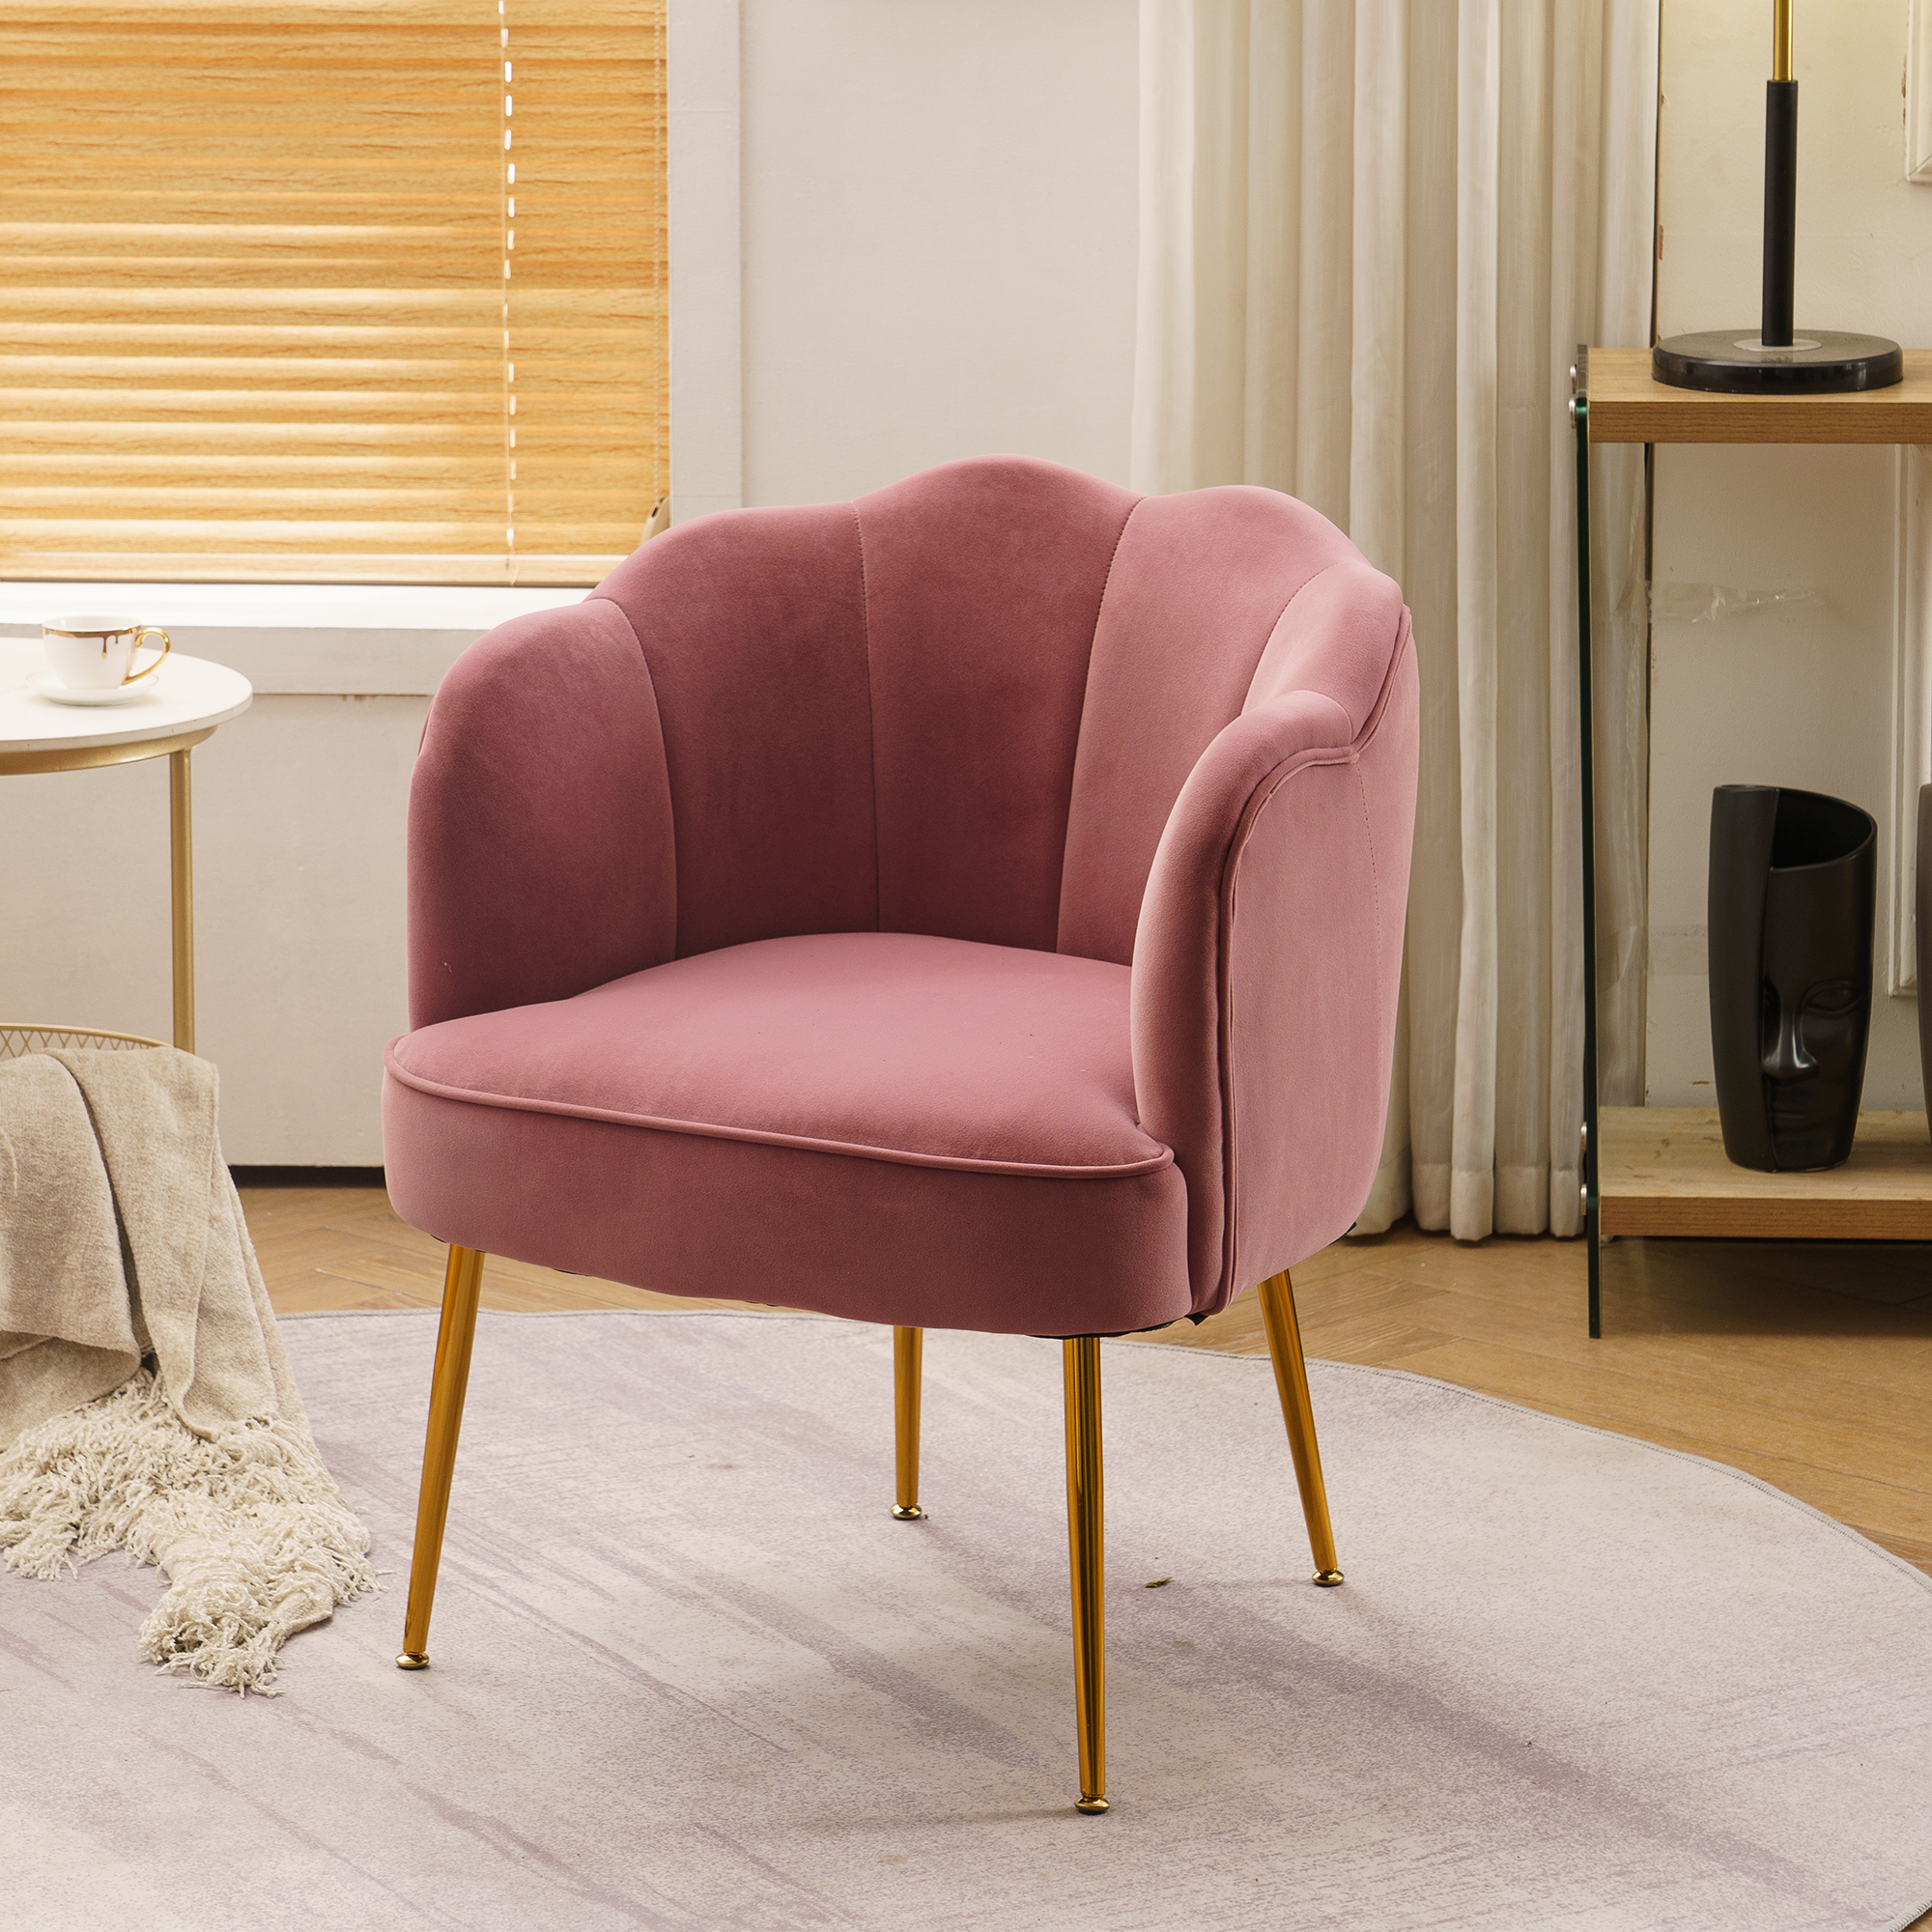 Pink Shell shape velvet fabric Armchair accent chair with gold legs for living room and bedroom-Boyel Living